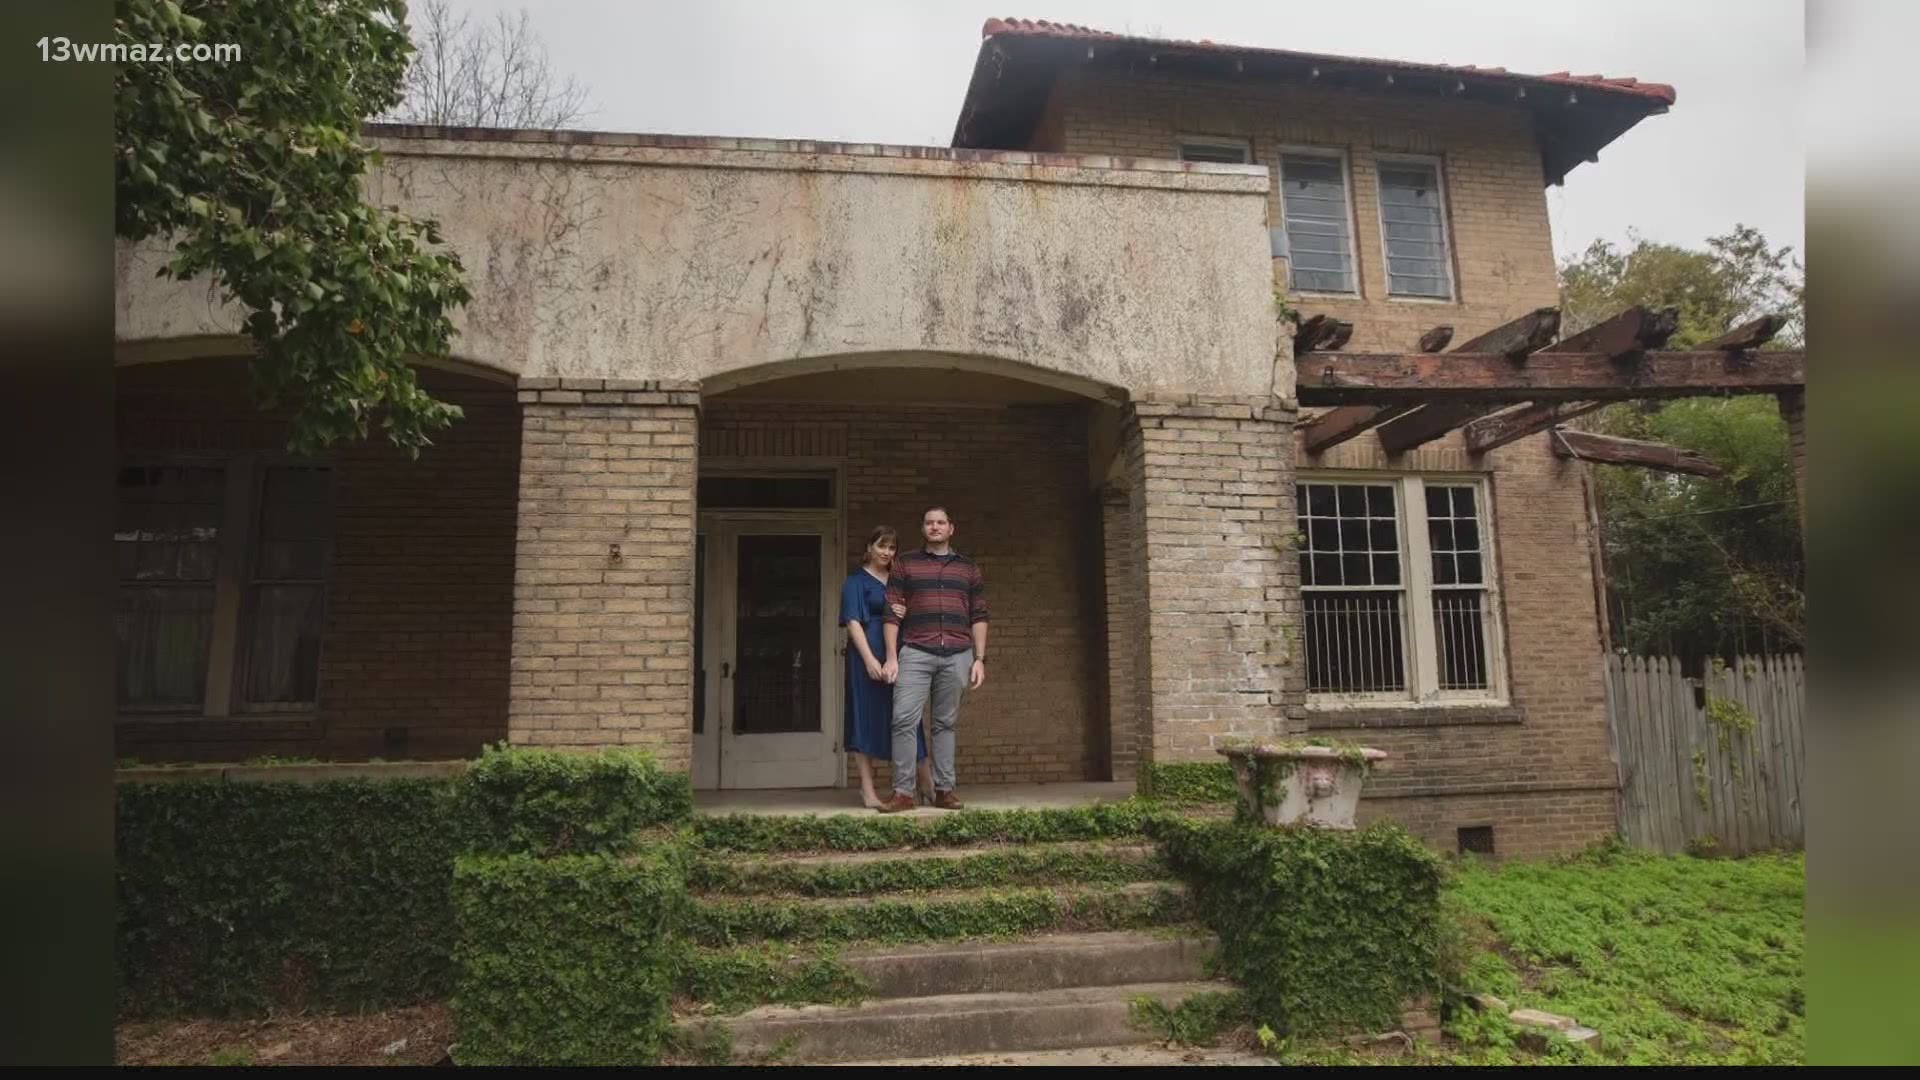 Rachelle Wilson and her husband Trent Mosely recently purchased the Guy Paine house on Hillcrest Avenue. They're set to close on the Italian Renaissance house Friday